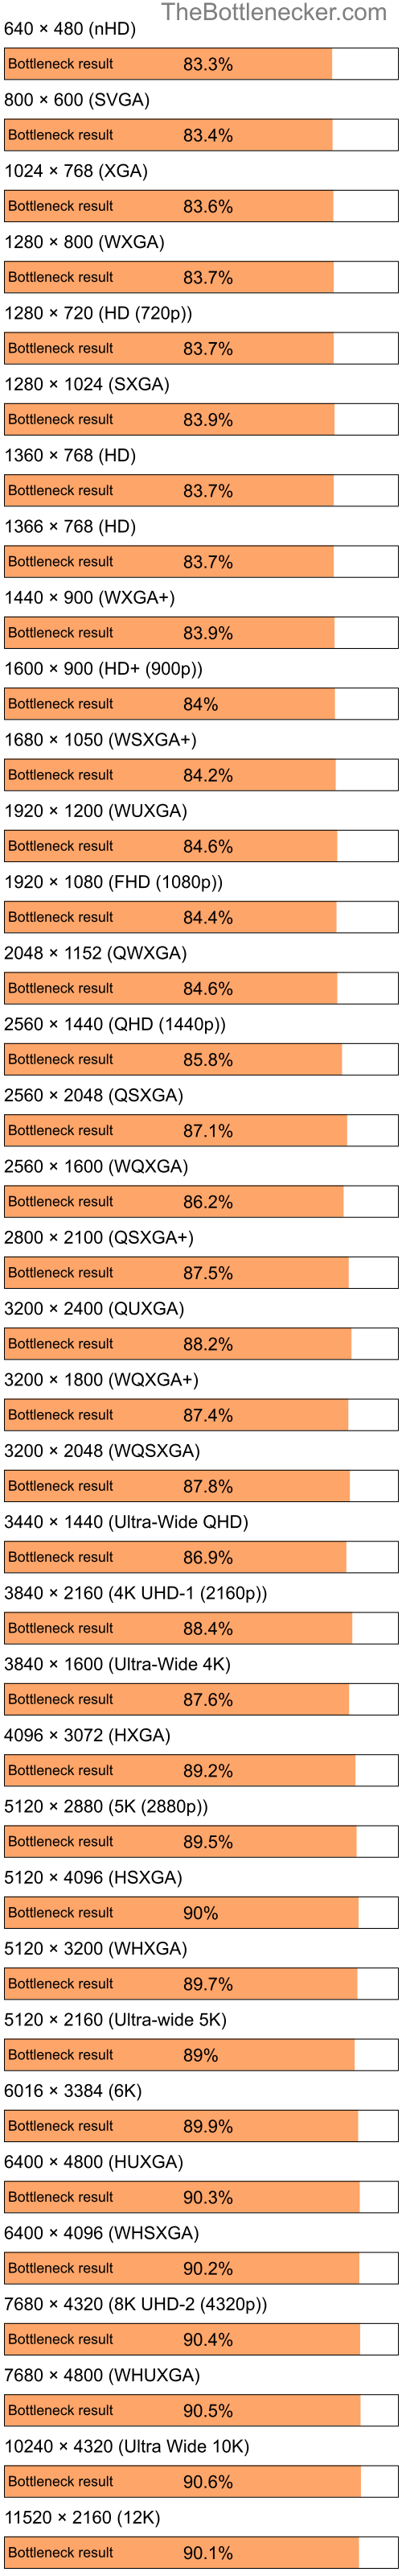 Bottleneck results by resolution for Intel Celeron M 420 and AMD Mobility Radeon XPRESS 200 in Graphic Card Intense Tasks